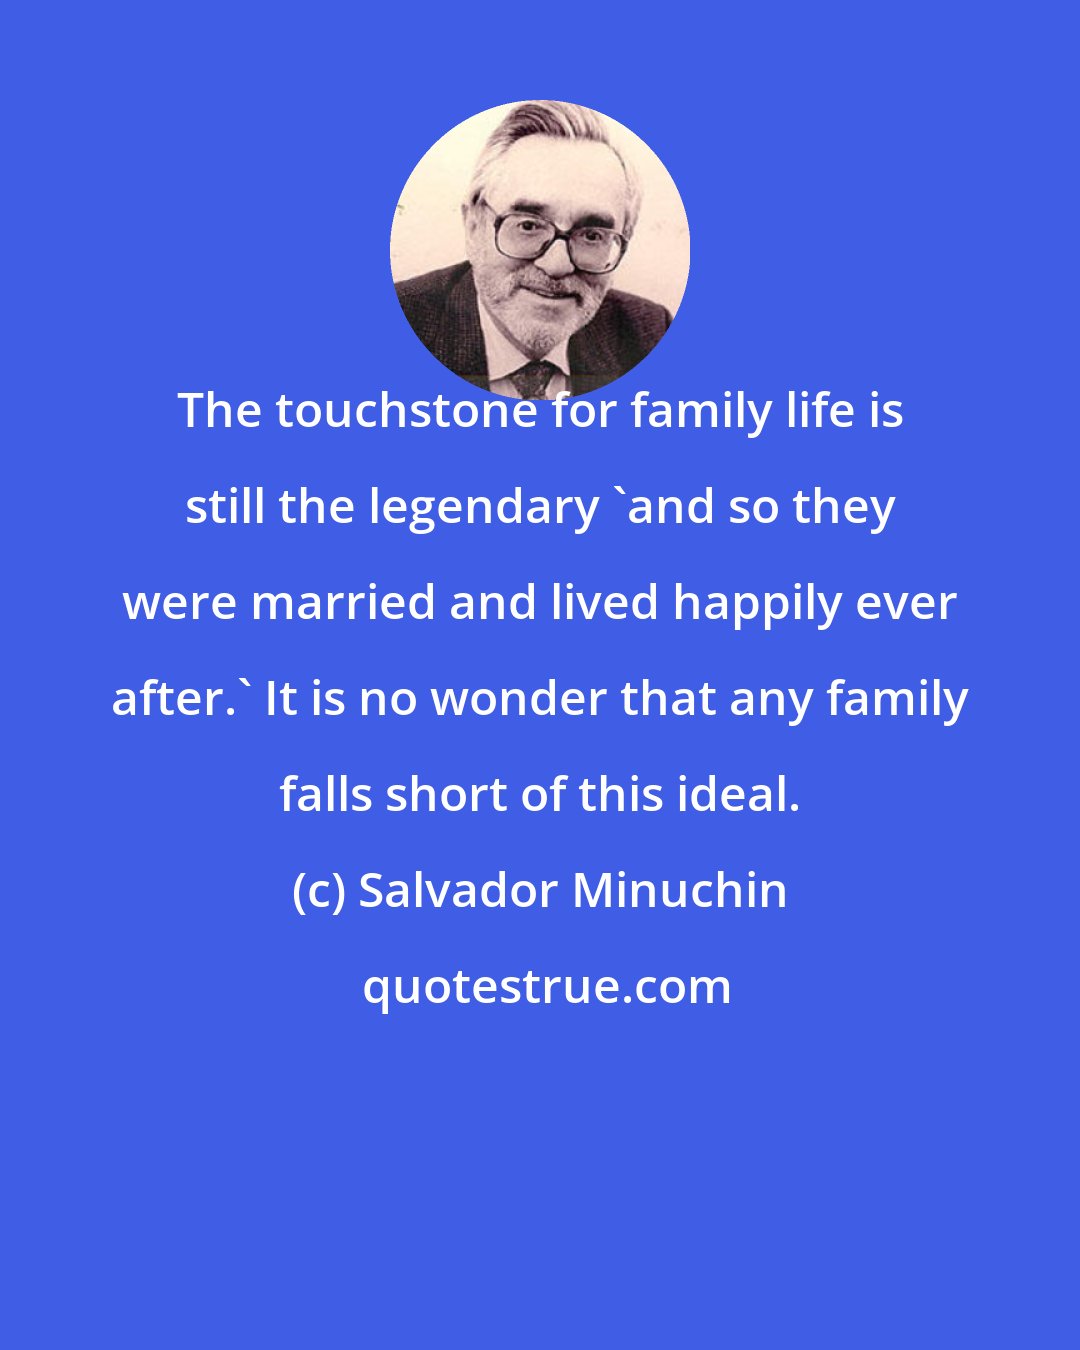 Salvador Minuchin: The touchstone for family life is still the legendary 'and so they were married and lived happily ever after.' It is no wonder that any family falls short of this ideal.